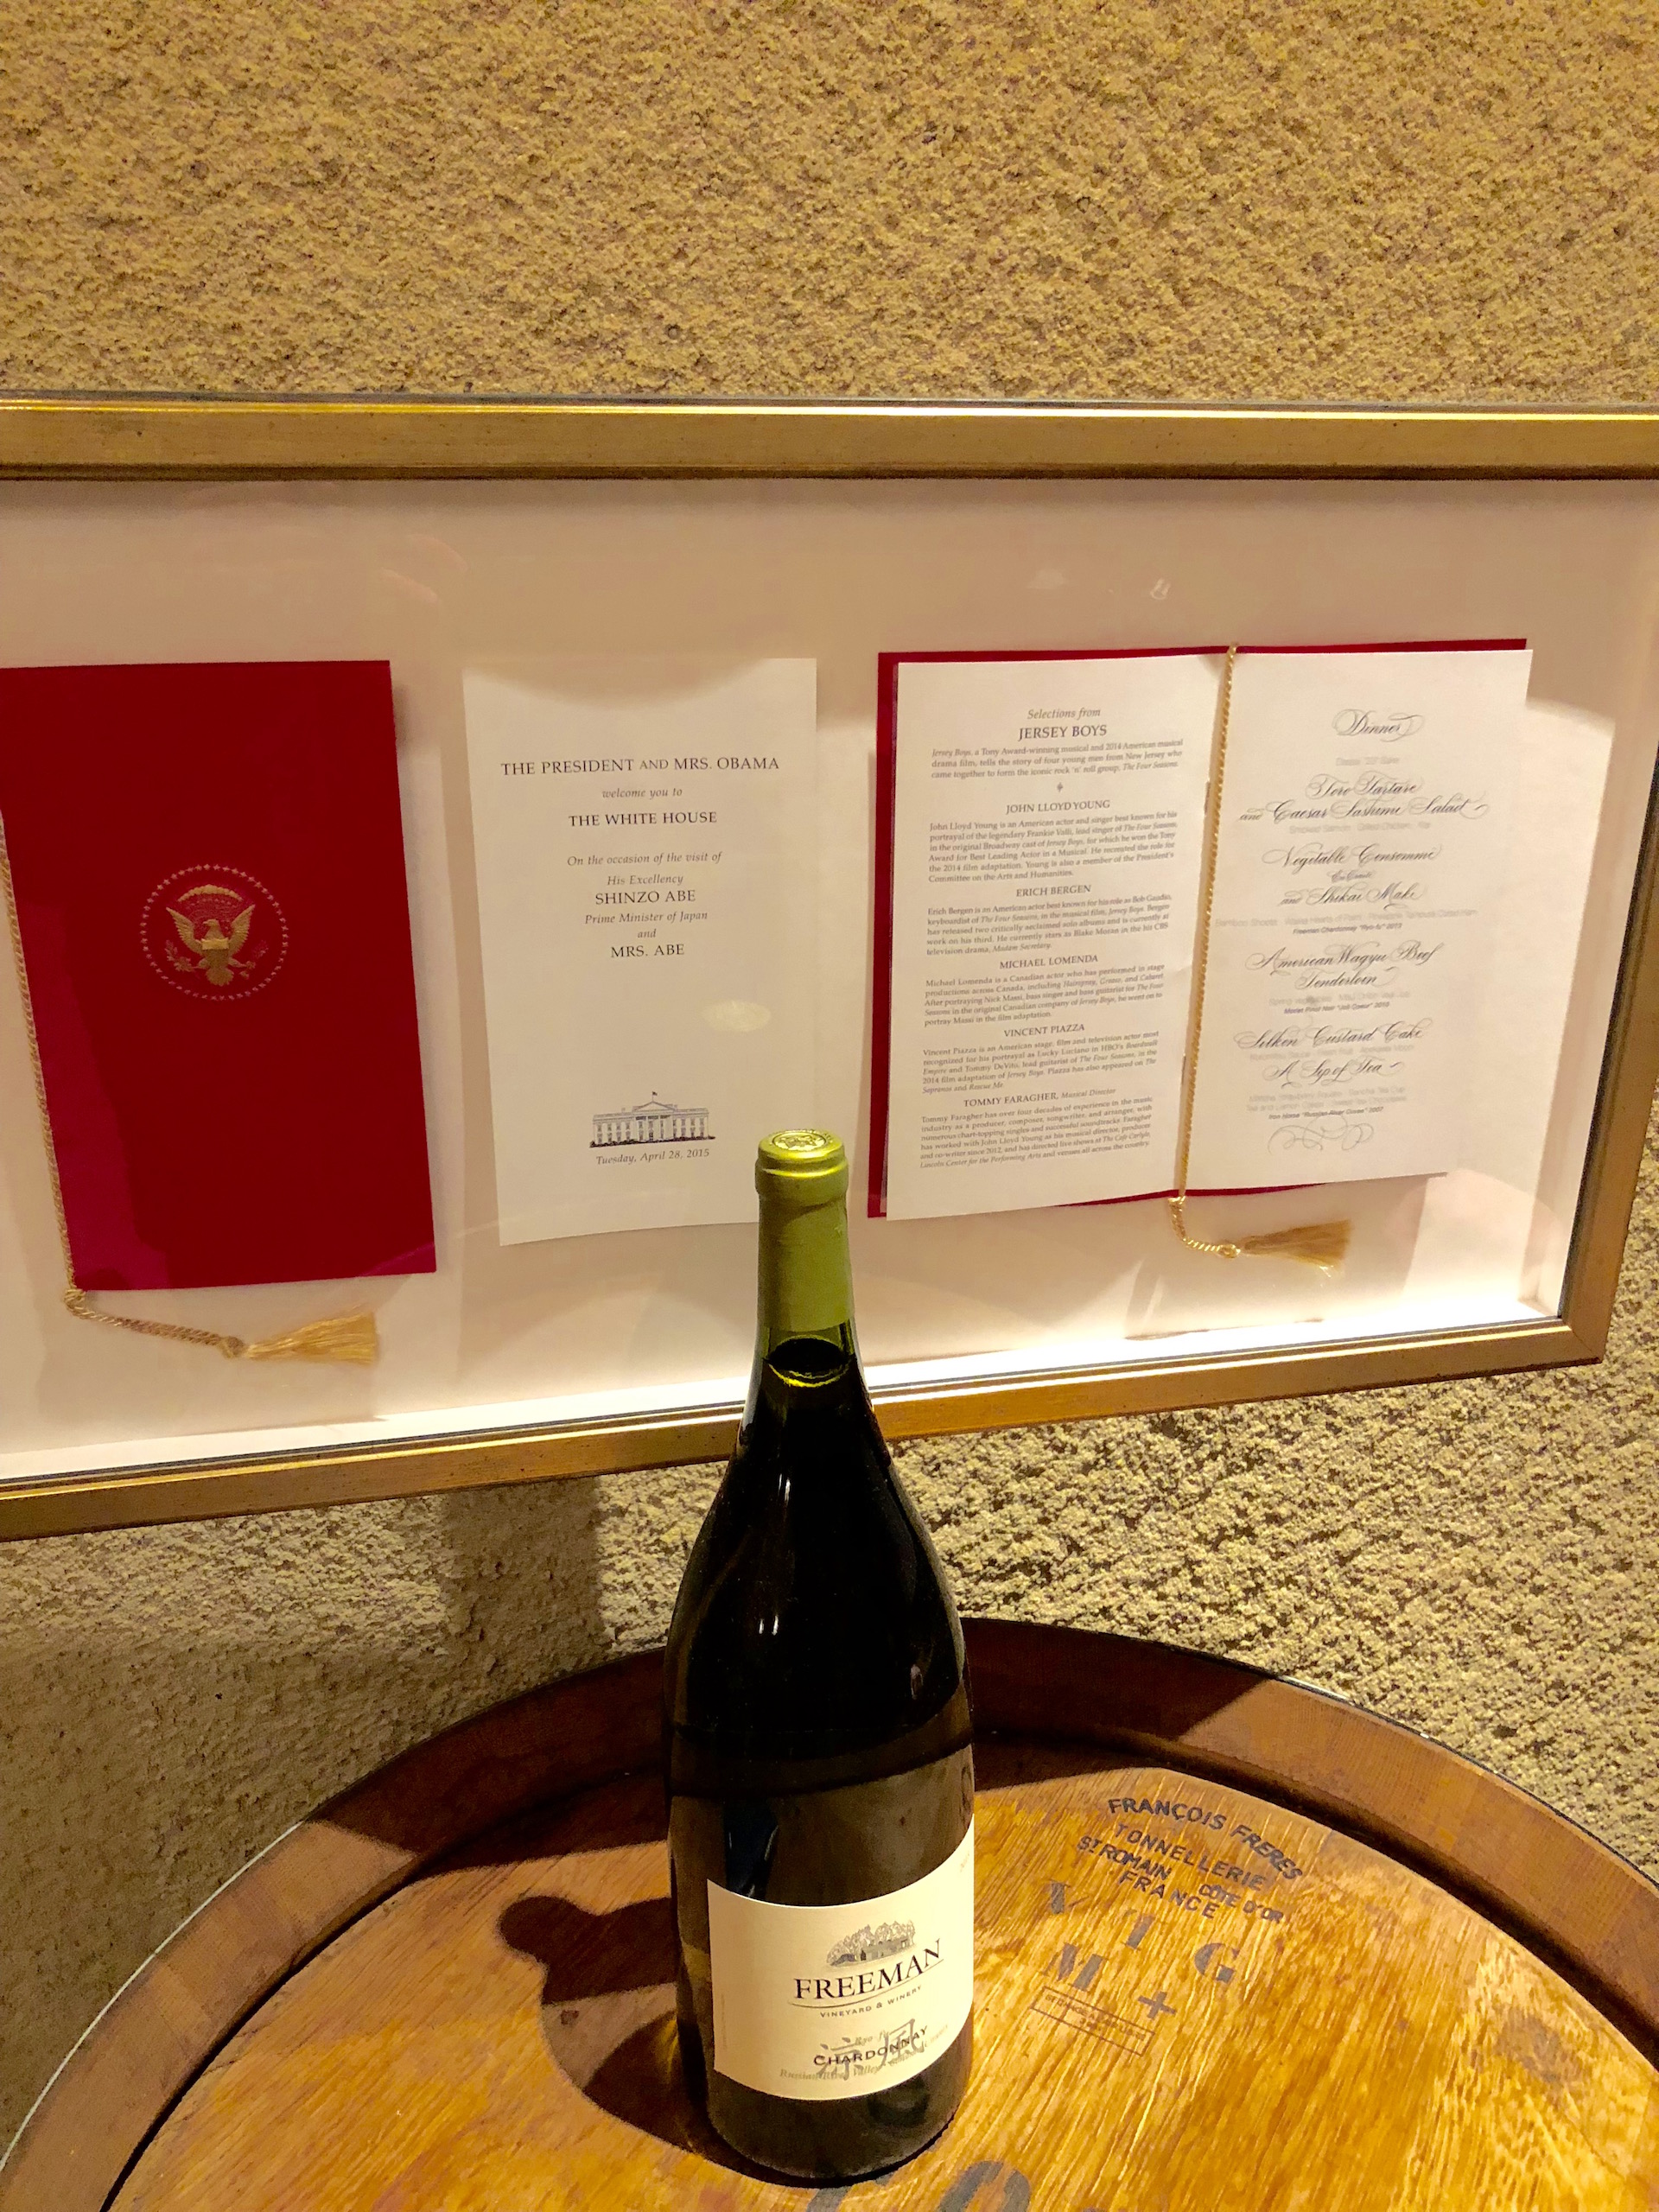 A copy of the entertainment program and menu from the 2015 White House dinner hosted by President Obama for Japanese Prime Minister Shinzo Abe, where Freeman Winery’s Ryo-fu Chardonnay was served